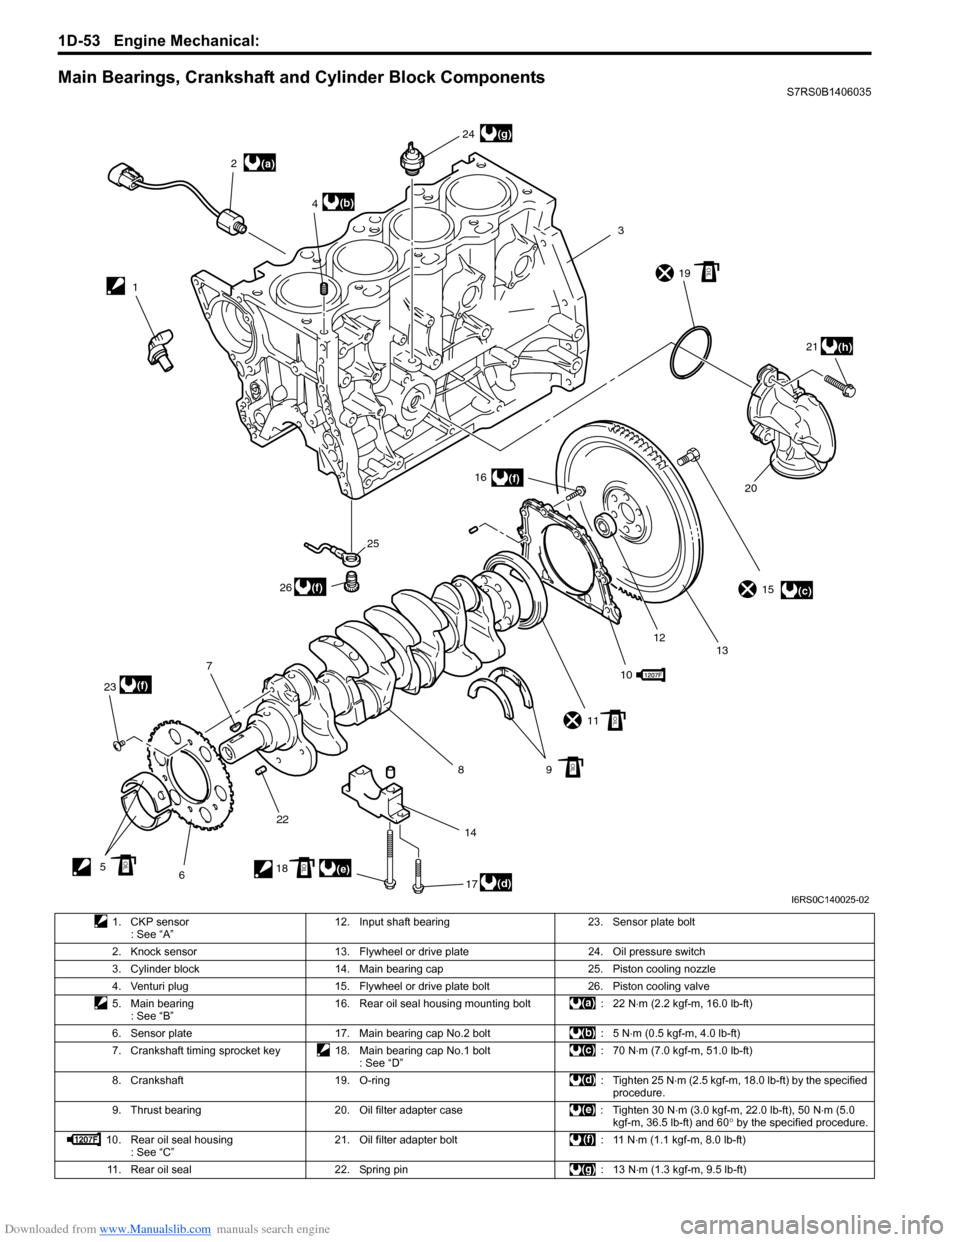 SUZUKI SWIFT 2008 2.G Service Owners Guide Downloaded from www.Manualslib.com manuals search engine 1D-53 Engine Mechanical: 
Main Bearings, Crankshaft and Cylinder Block ComponentsS7RS0B1406035
(a)
(c)
(d)(e)
(b)
(f)
(f)
(f)
(g)
(h)
12
3
4
5 